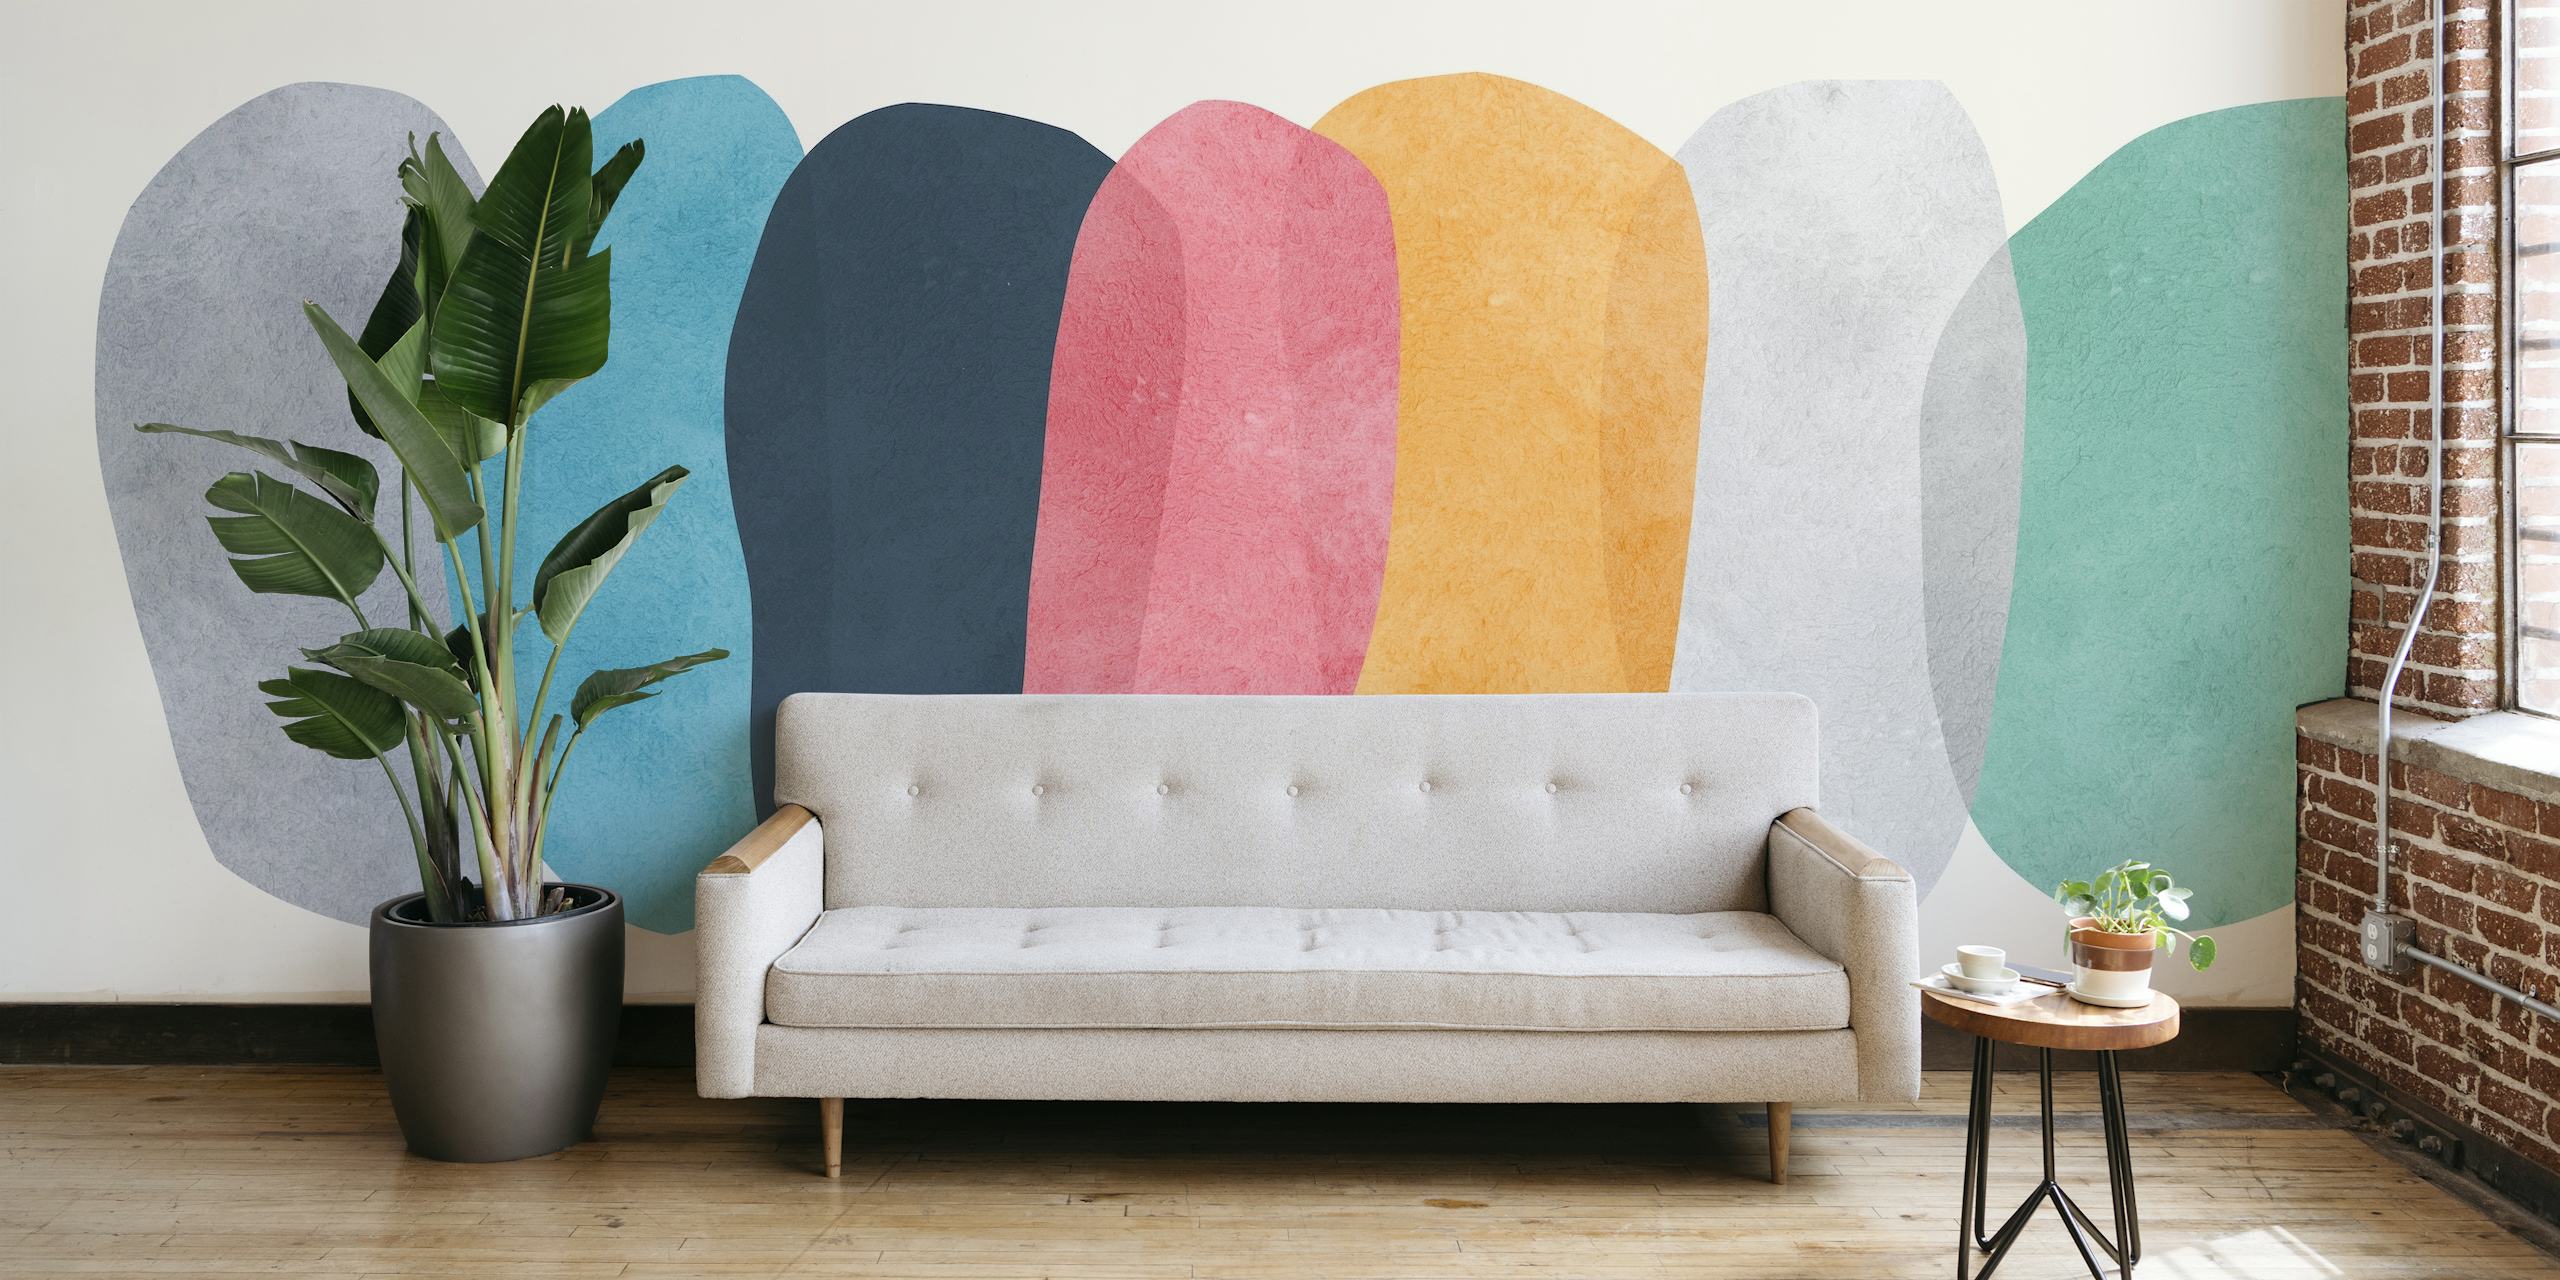 Abstract wall mural with elliptical shapes in muted colors featuring blue and yellow accents